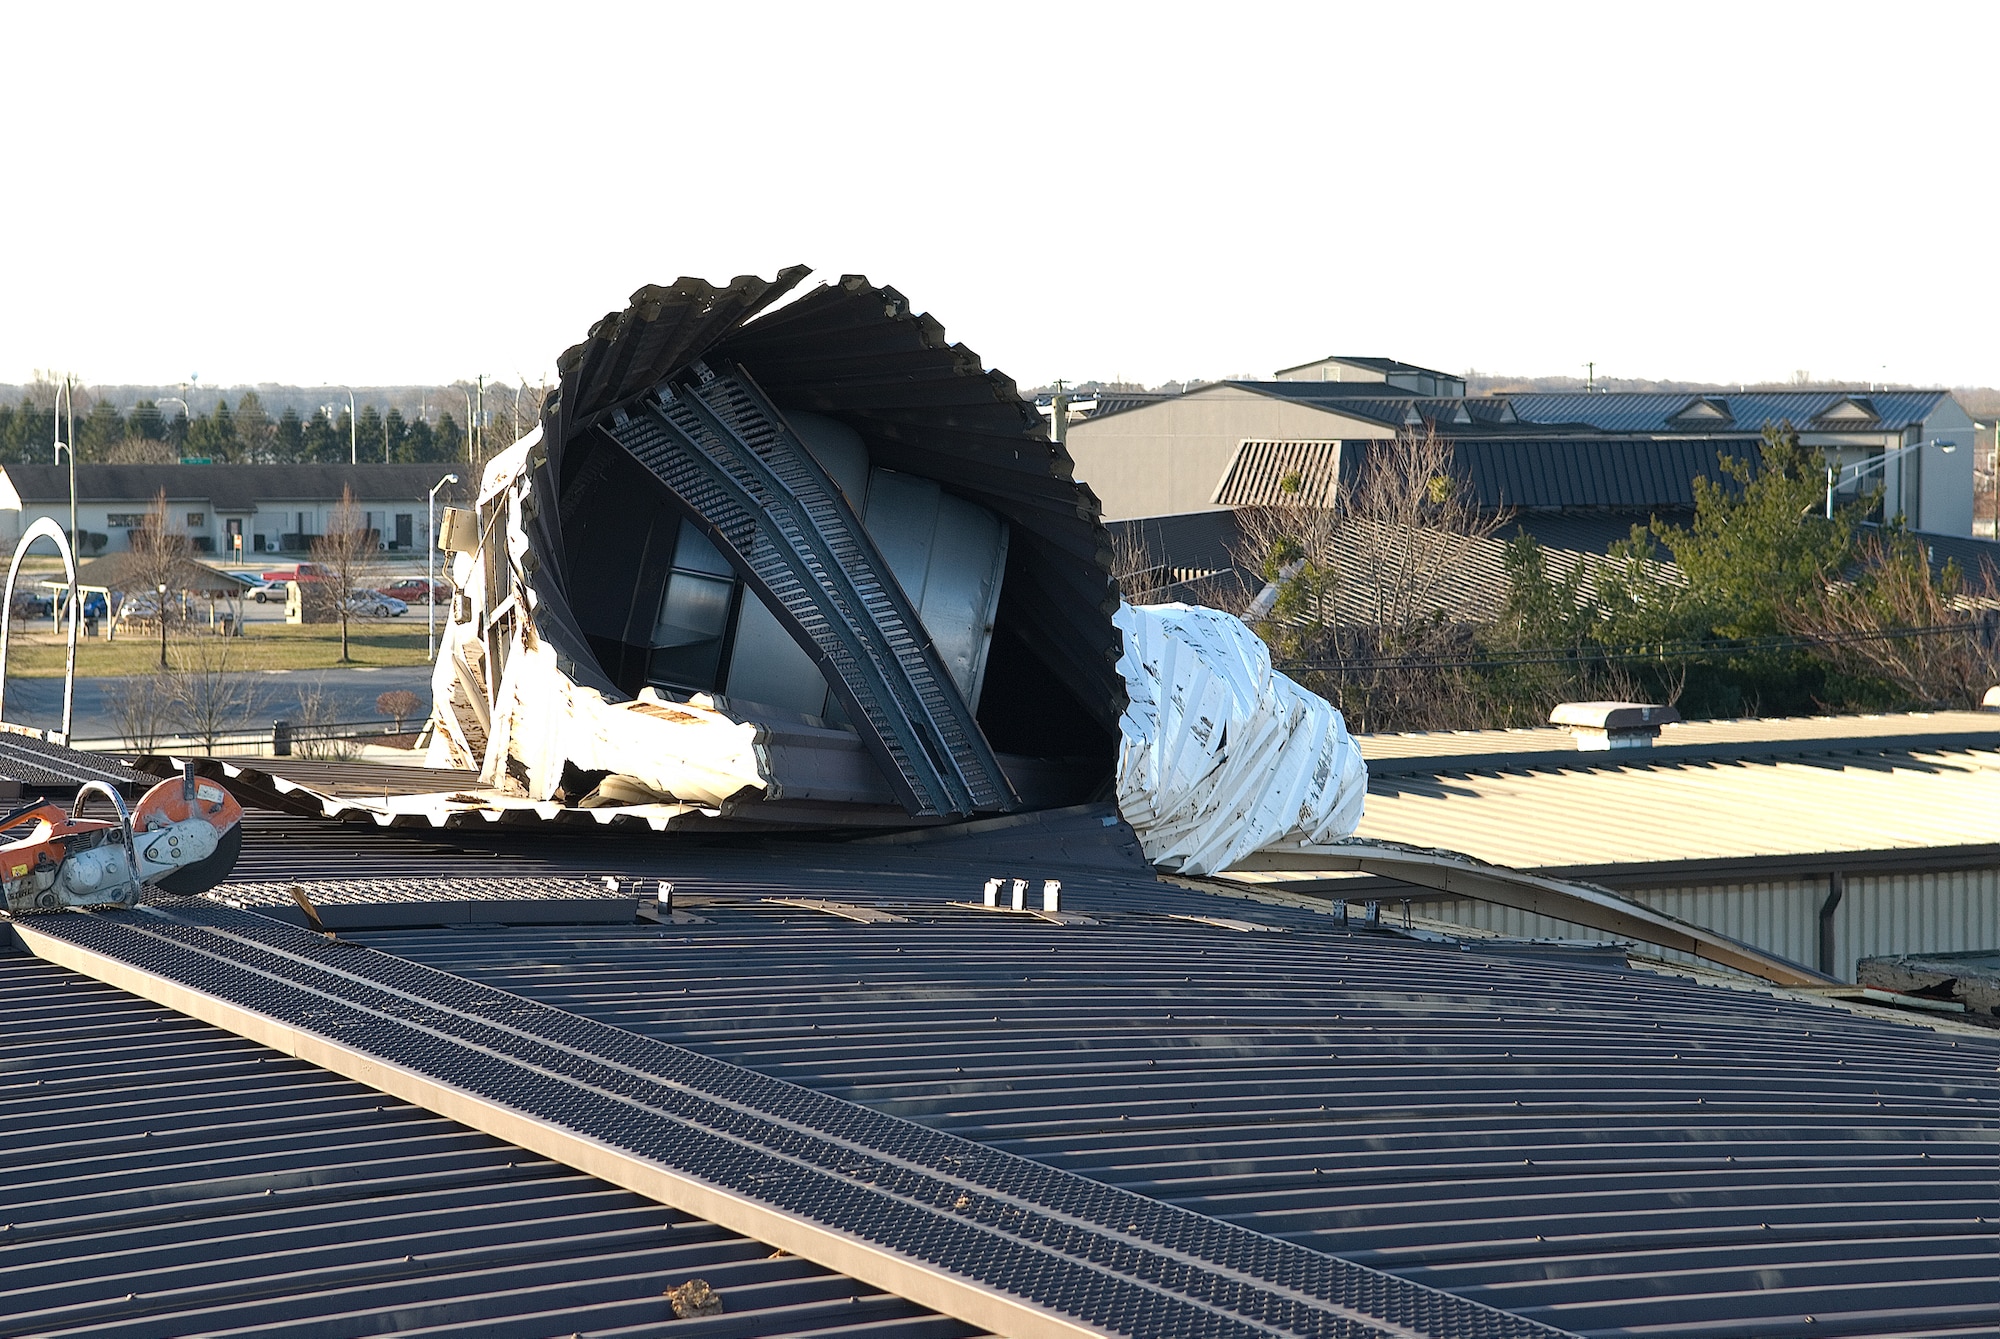 The exhaust ventilator (pictured) and approximately 12,000 square feet of metal roof was damaged at the Dover Air Force Base Fitness Center Feb. 10. High winds, with gusts reaching 51 knots, caused the metal roofing at the base Fitness Center to pull from the structure and wrap around the exhaust ventilator. (U.S. Air Force photo/Roland Balik)